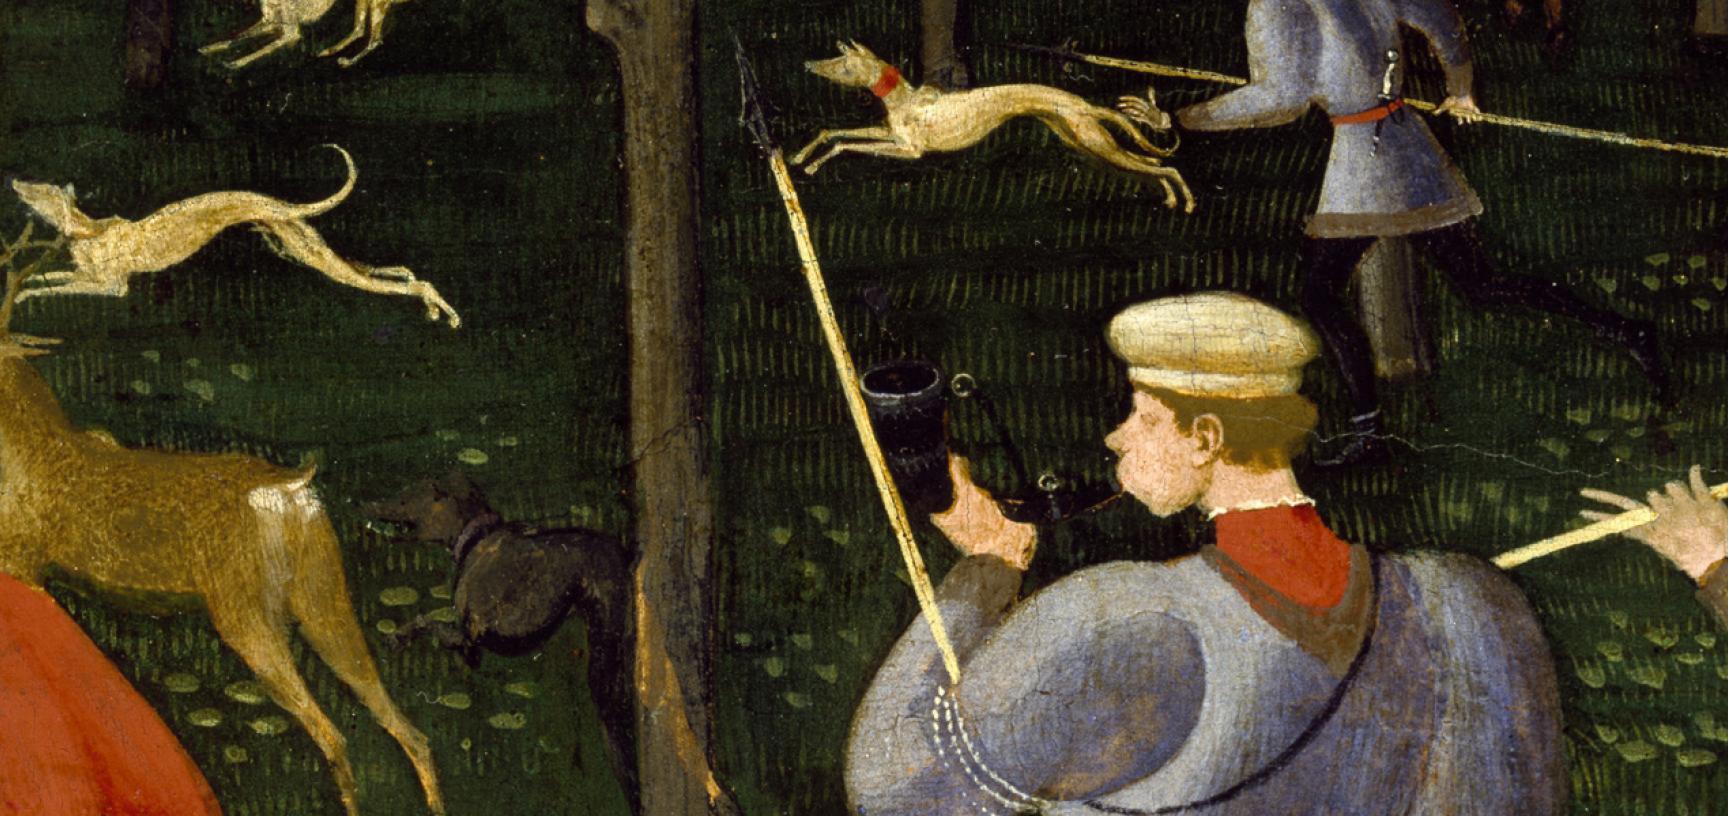 The Hunt in the Forest (detail) by Uccello